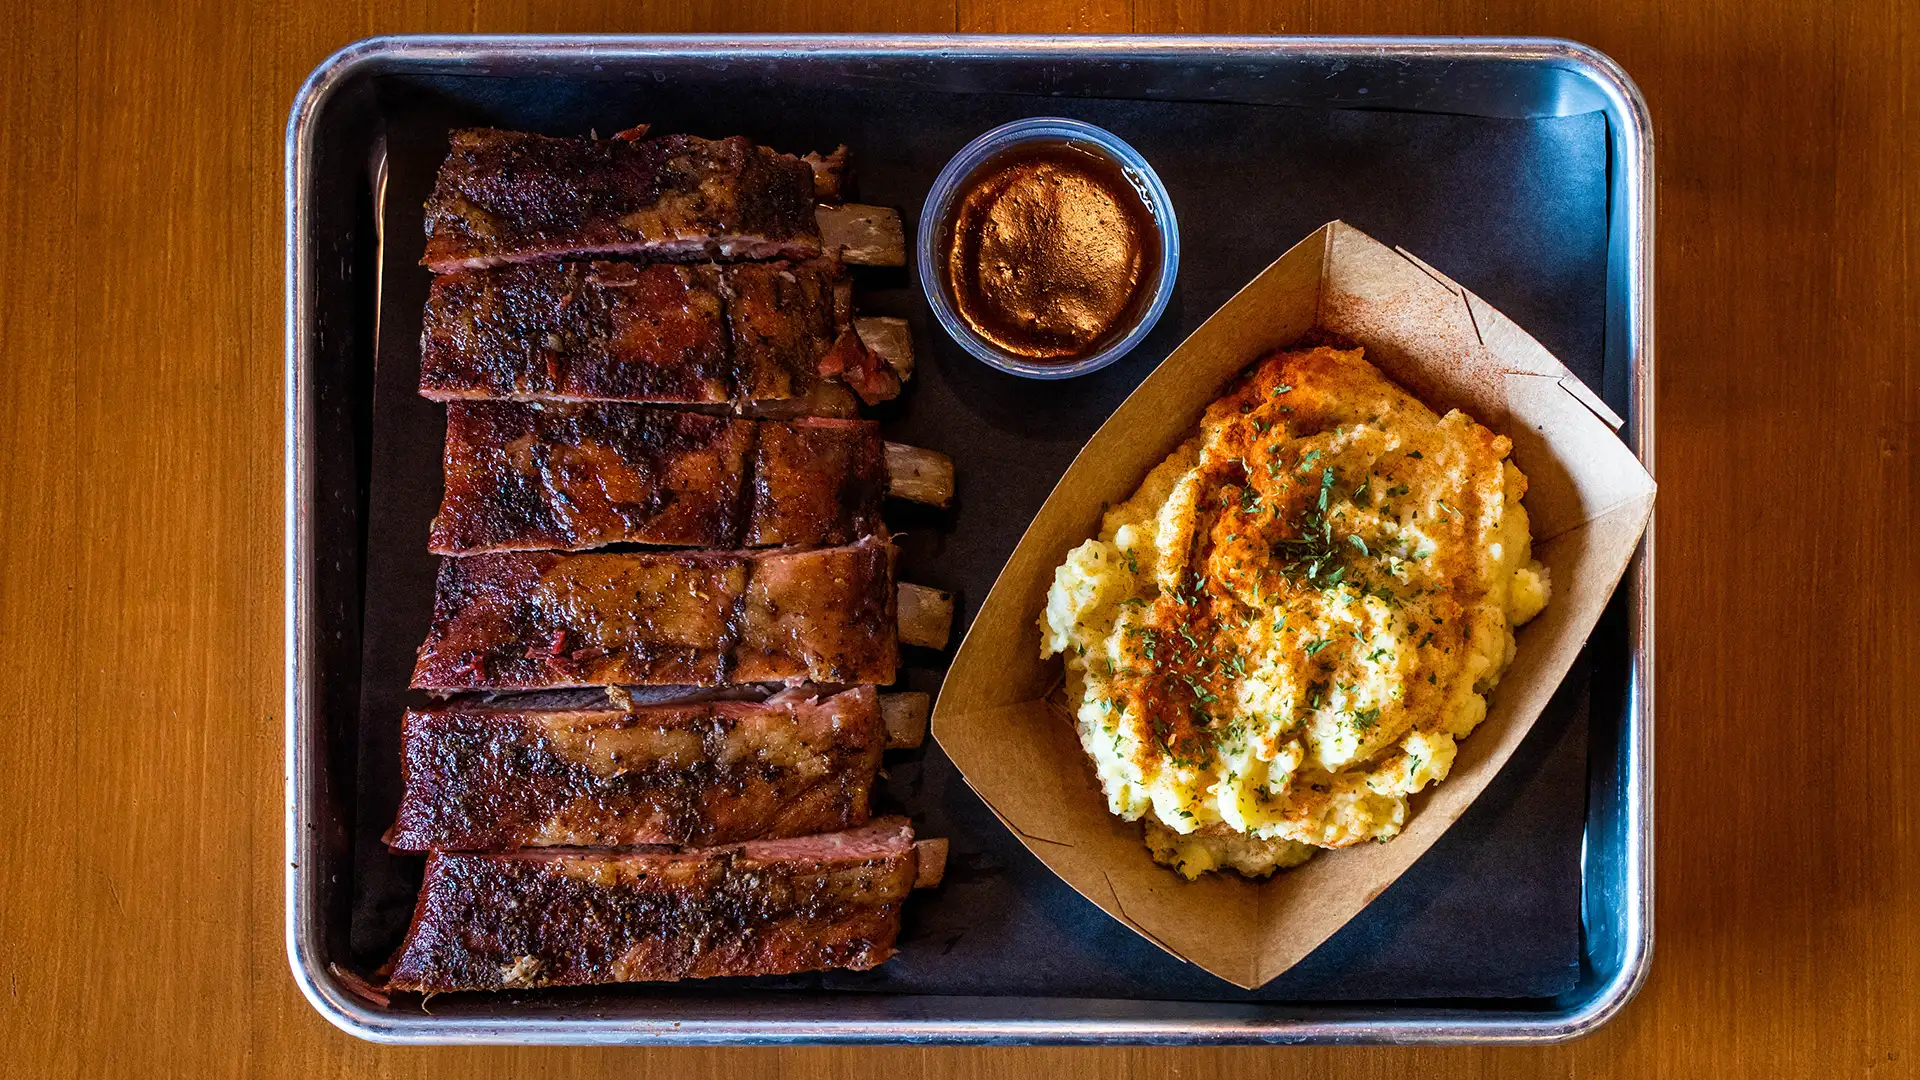 Plate with ribs and a side of potatoes